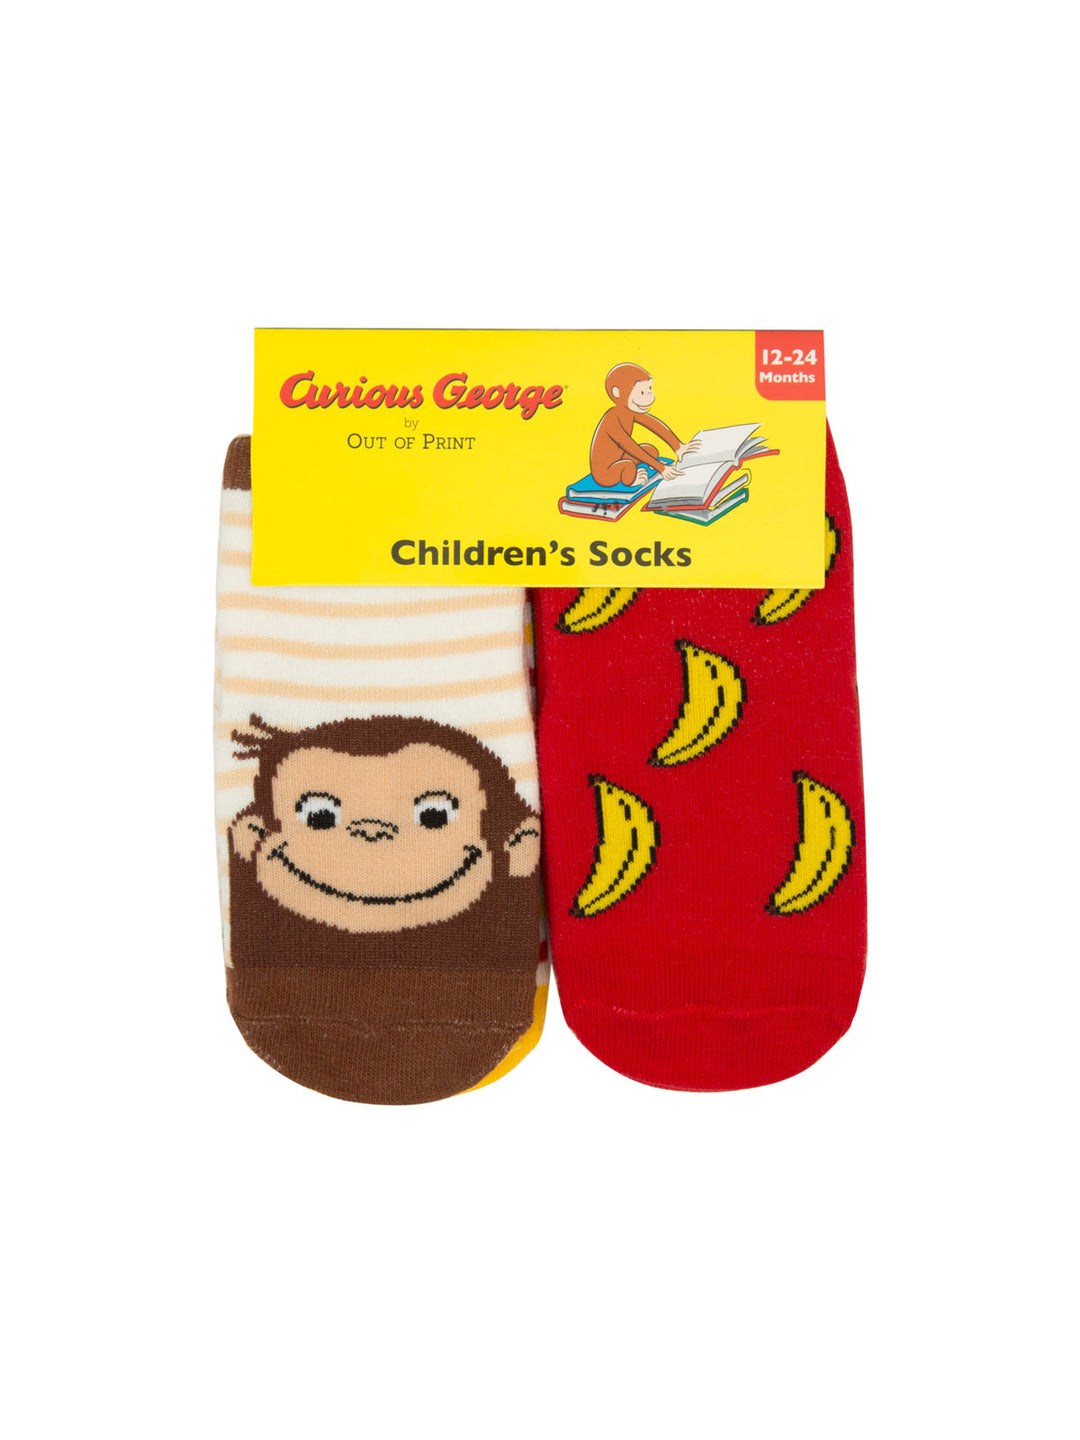 Curious George Socks | 4 Pack - West of Camden - Main Image Number 1 of 1